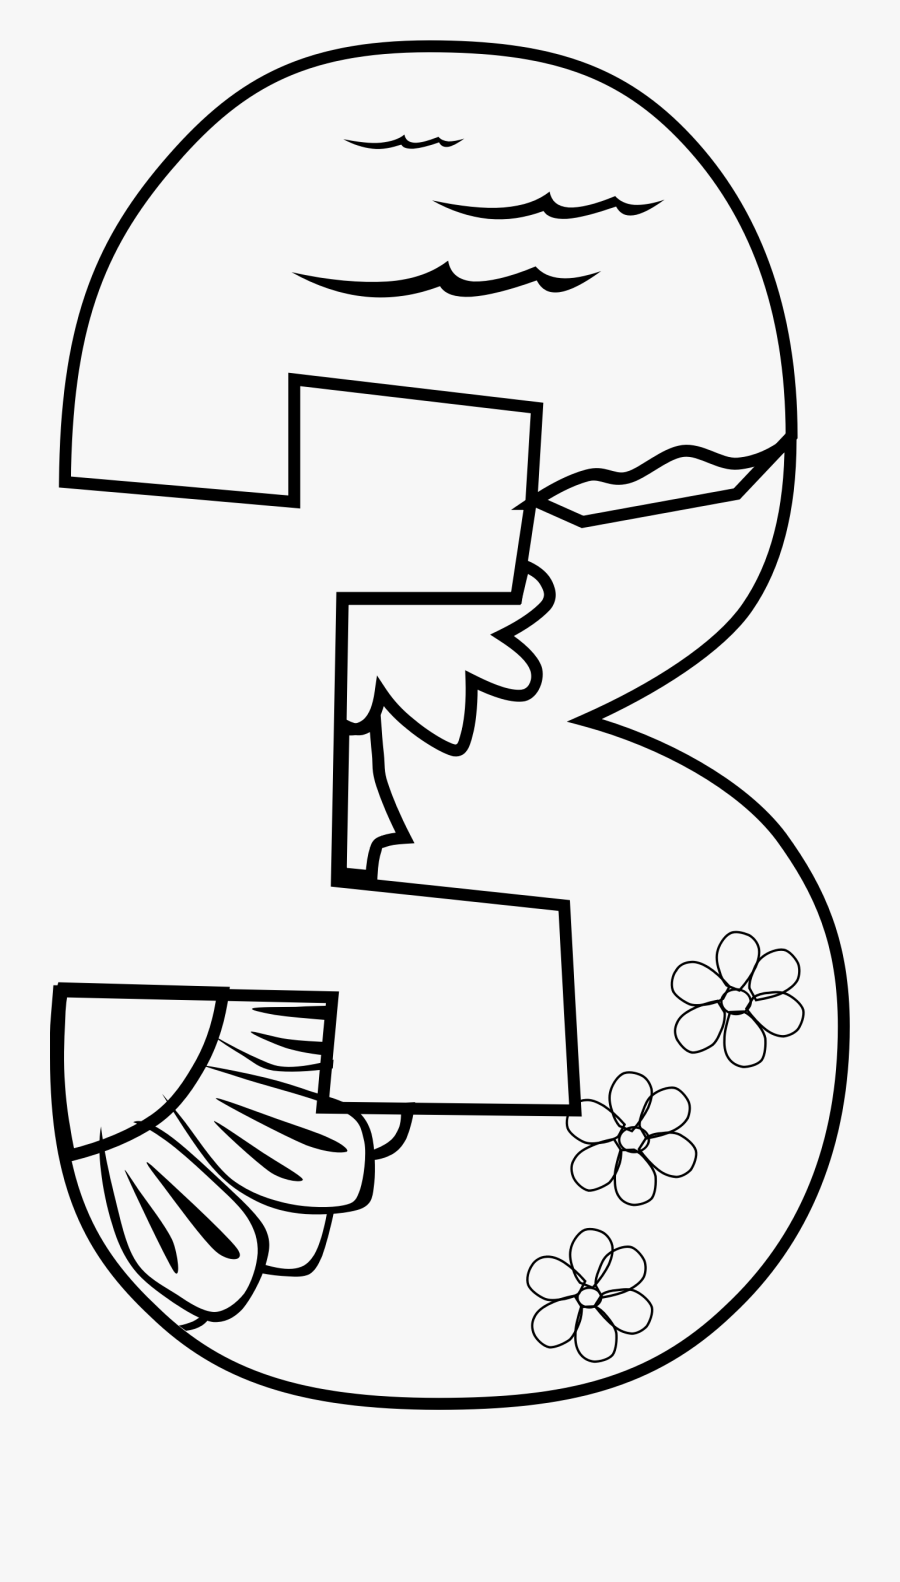 Book Clipart Colouring Sheet - Day 3 Creation Coloring Page, Transparent Clipart